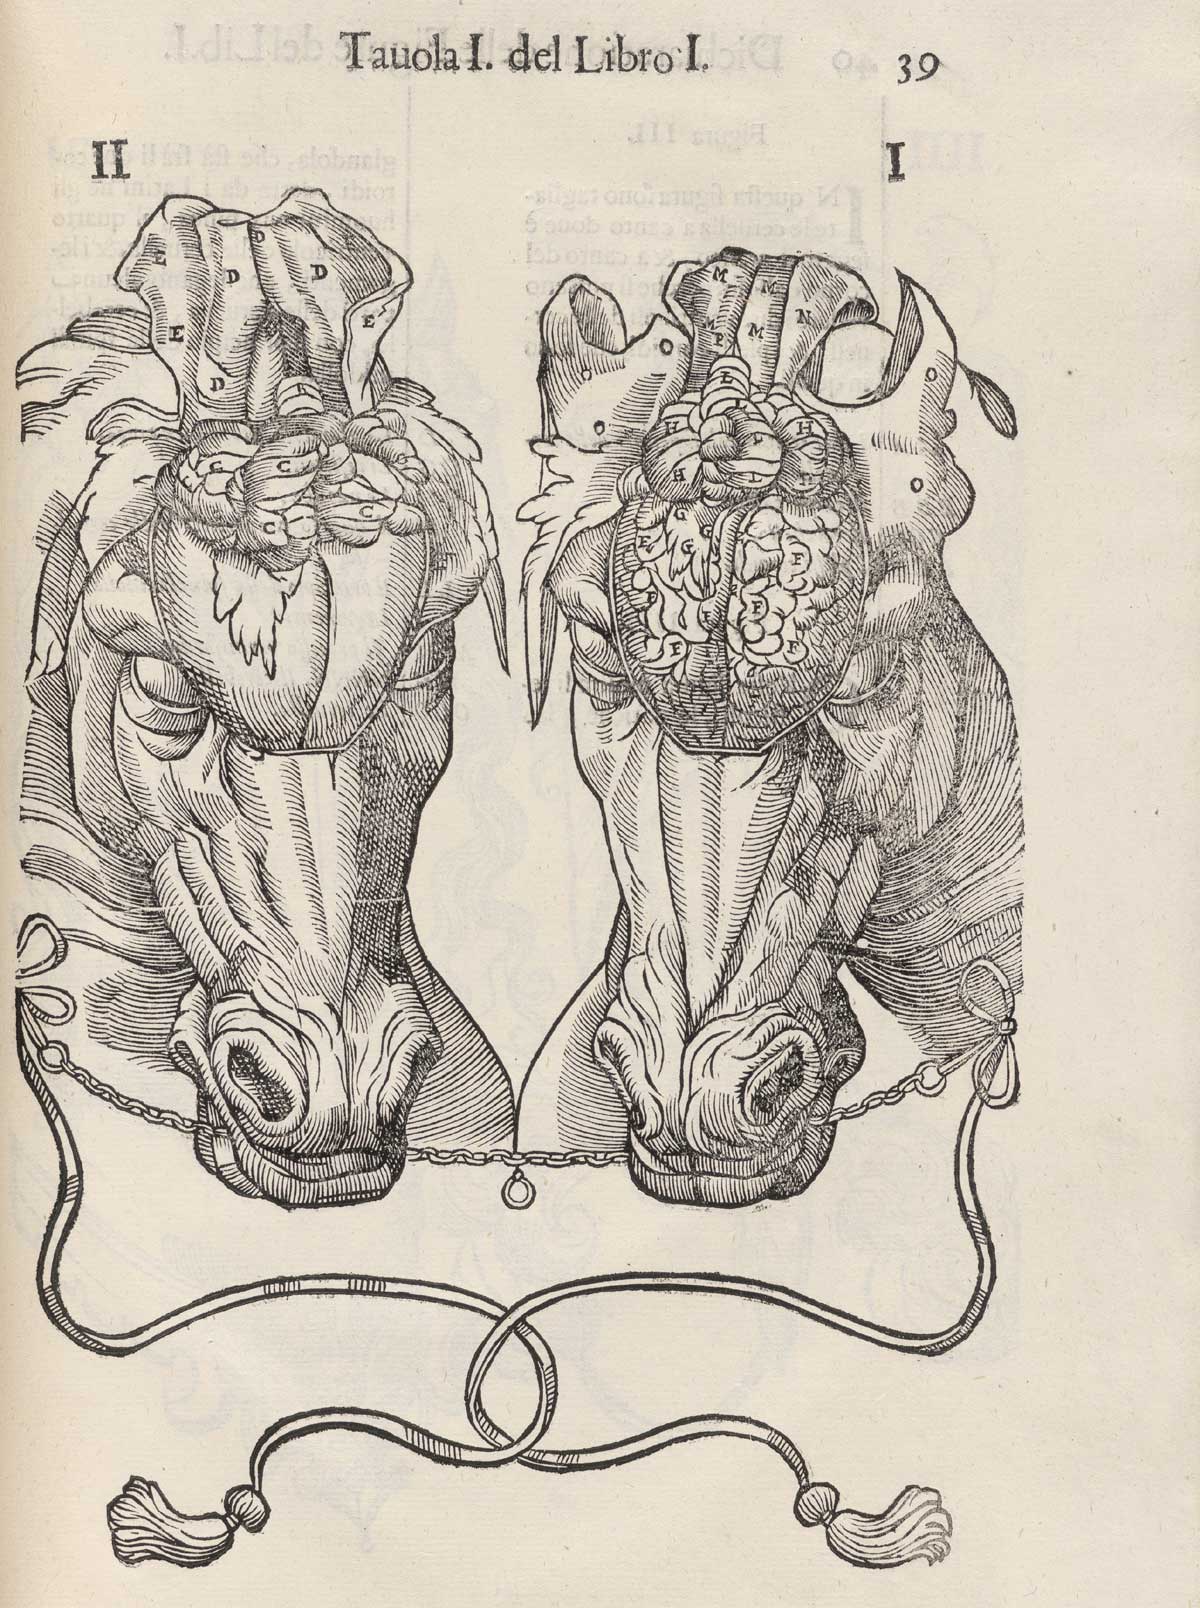 Page 39 of Ruini's Anatomia del cavallo, infermità, et suoi rimedii, featuring the front view of the heads of two horses flayed to expose the brain and duramatter.